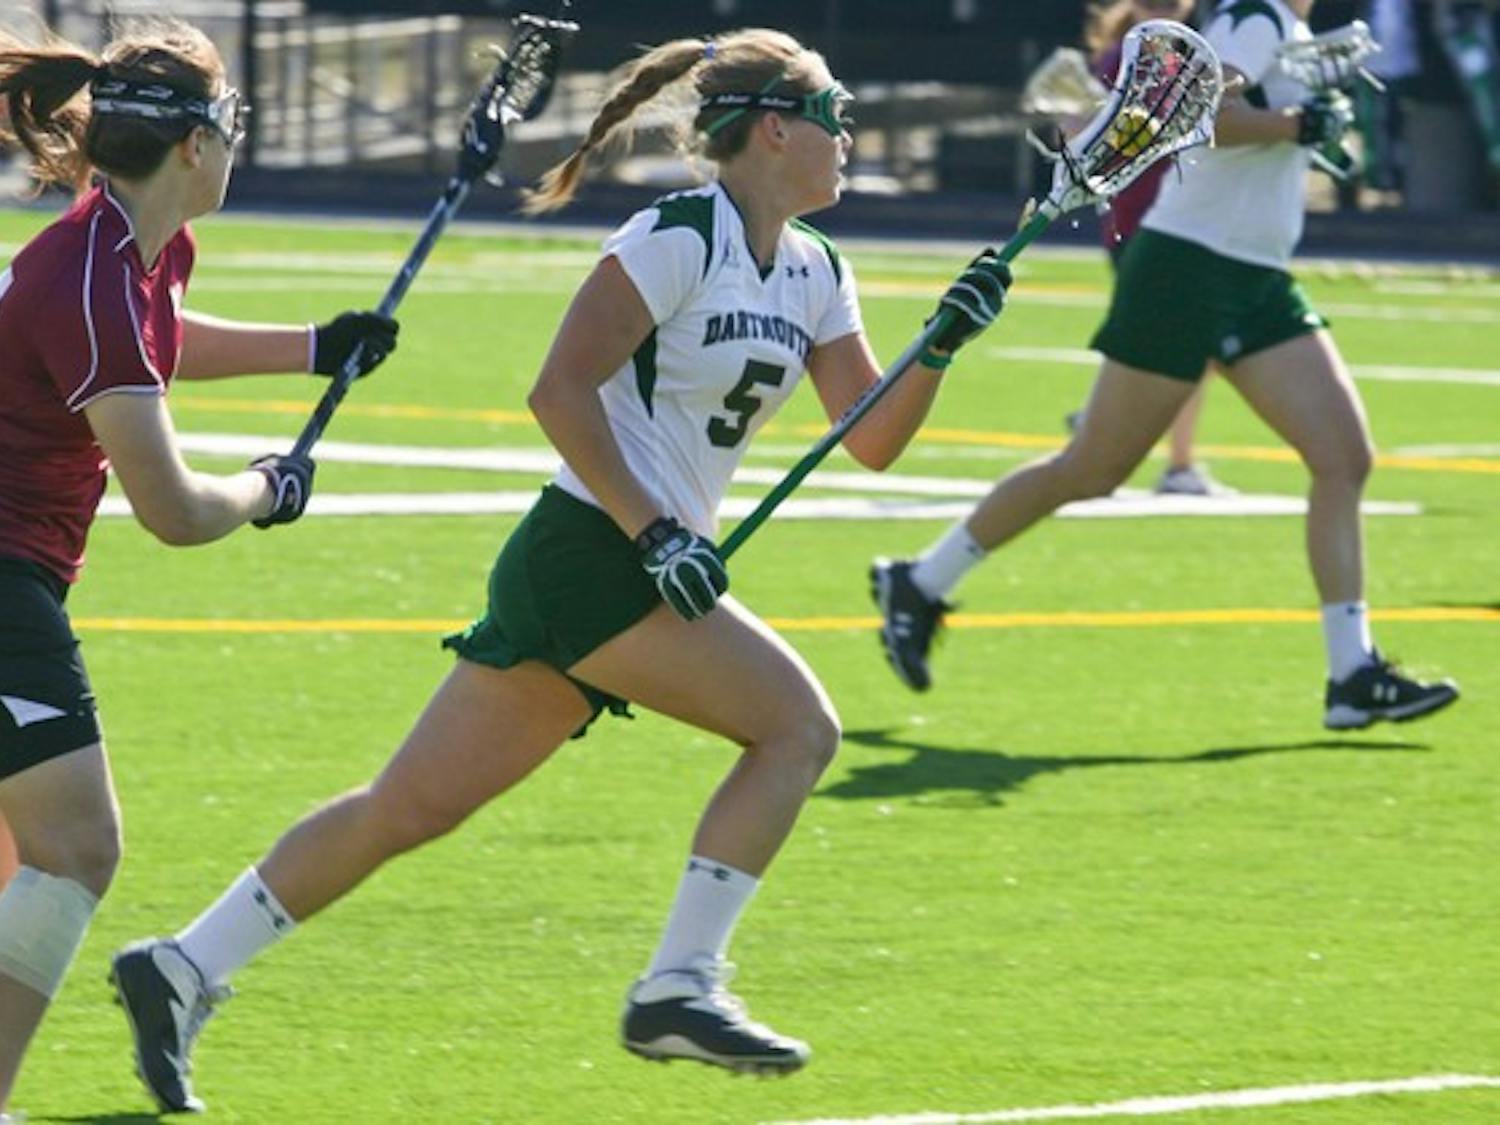 The Big Green women's lacrosse team is slated to face No. 8 Syracuse University in Hanover on Tuesday.